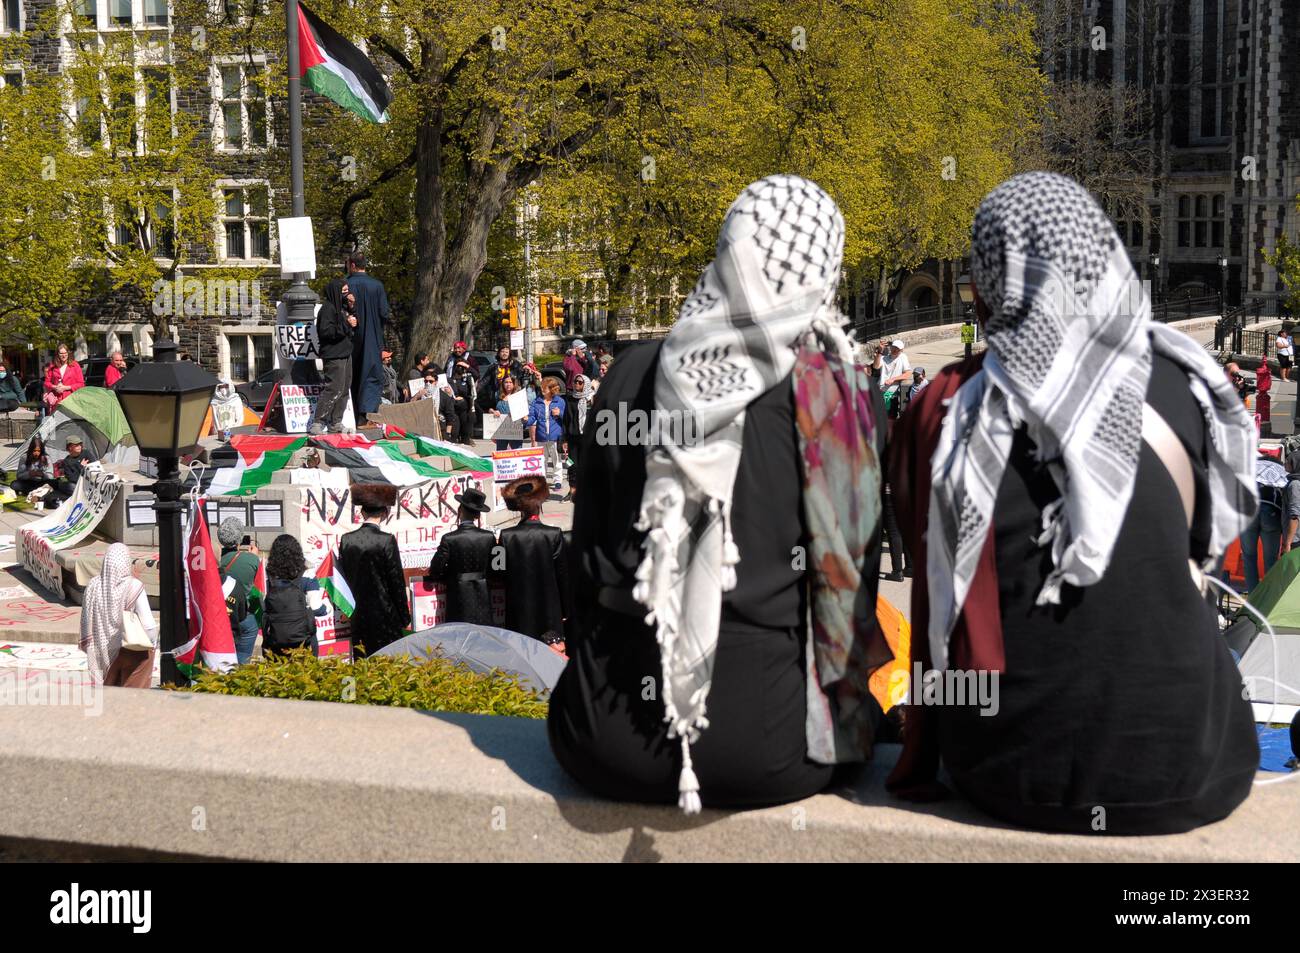 Two protesters wearing keffiyeh headdresses are seen at a pro-Palestine encampment at the City College of New York. Pro-Palestine demonstrators rallied in a courtyard in the City College of New York in Manhattan, New York City condemning the Israel Defense Forces' military operations in Gaza. Since Thursday morning, students and pro-Palestine activists at City College have held a sit-in protest on campus, forming a 'Gaza Solidarity Encampment.' The City College encampment follows a similar encampment that began in Columbia University in New York City last week. Encampments have been forming in Stock Photo